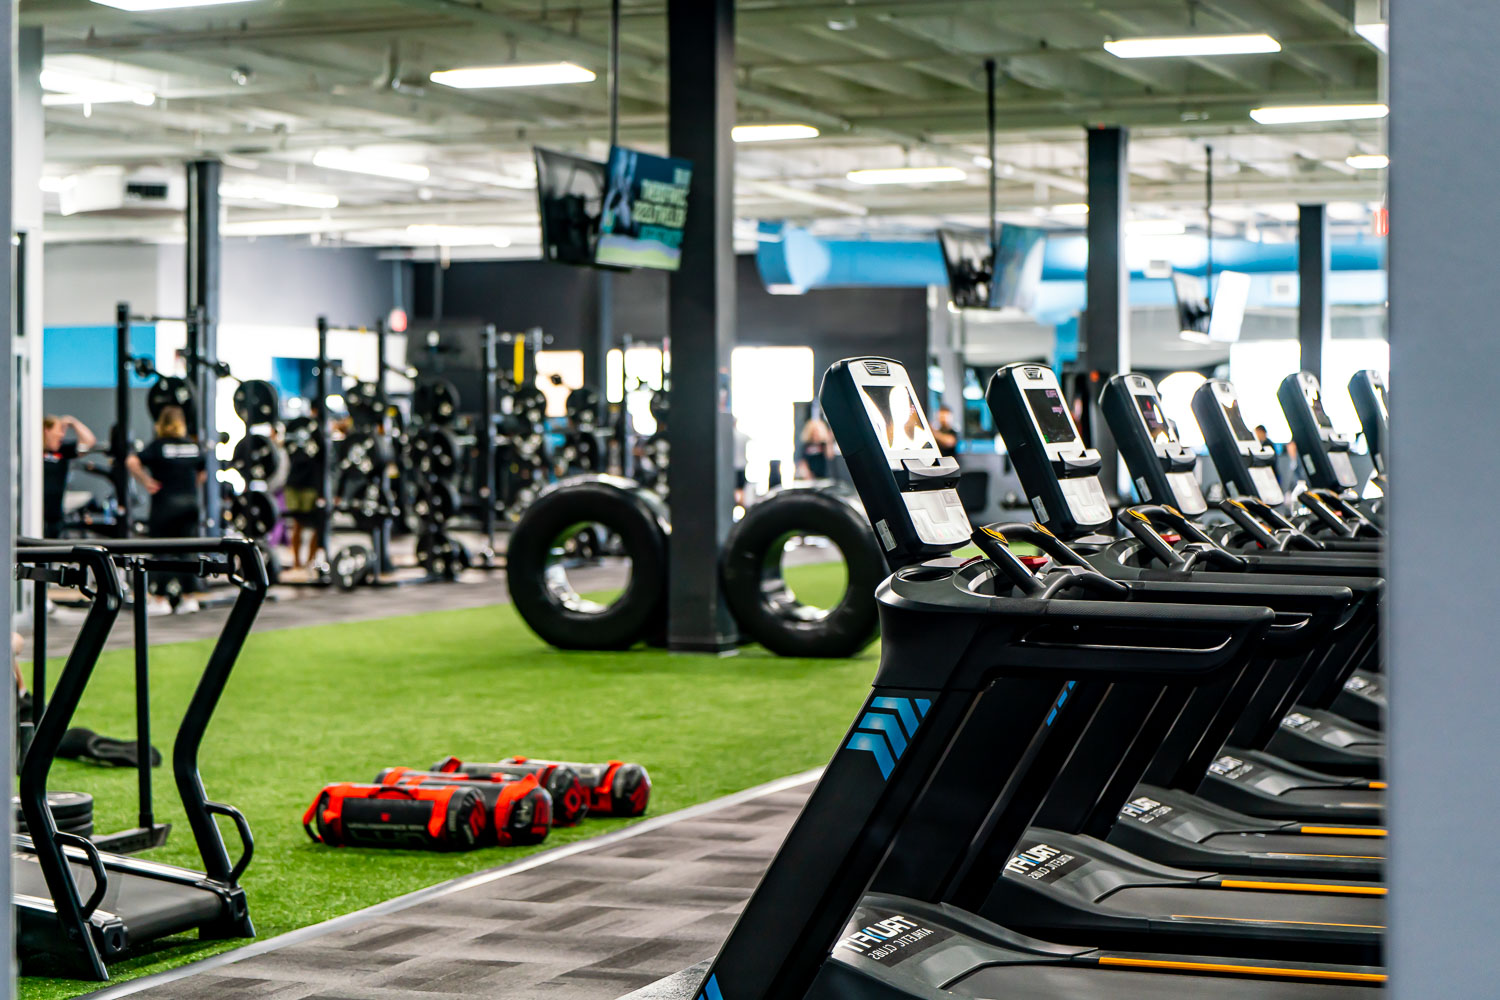 TRUFIT ATHLETIC CLUB - 1508 Gallatin Pike S, Nashville, Tennessee - Gyms -  Phone Number - Yelp